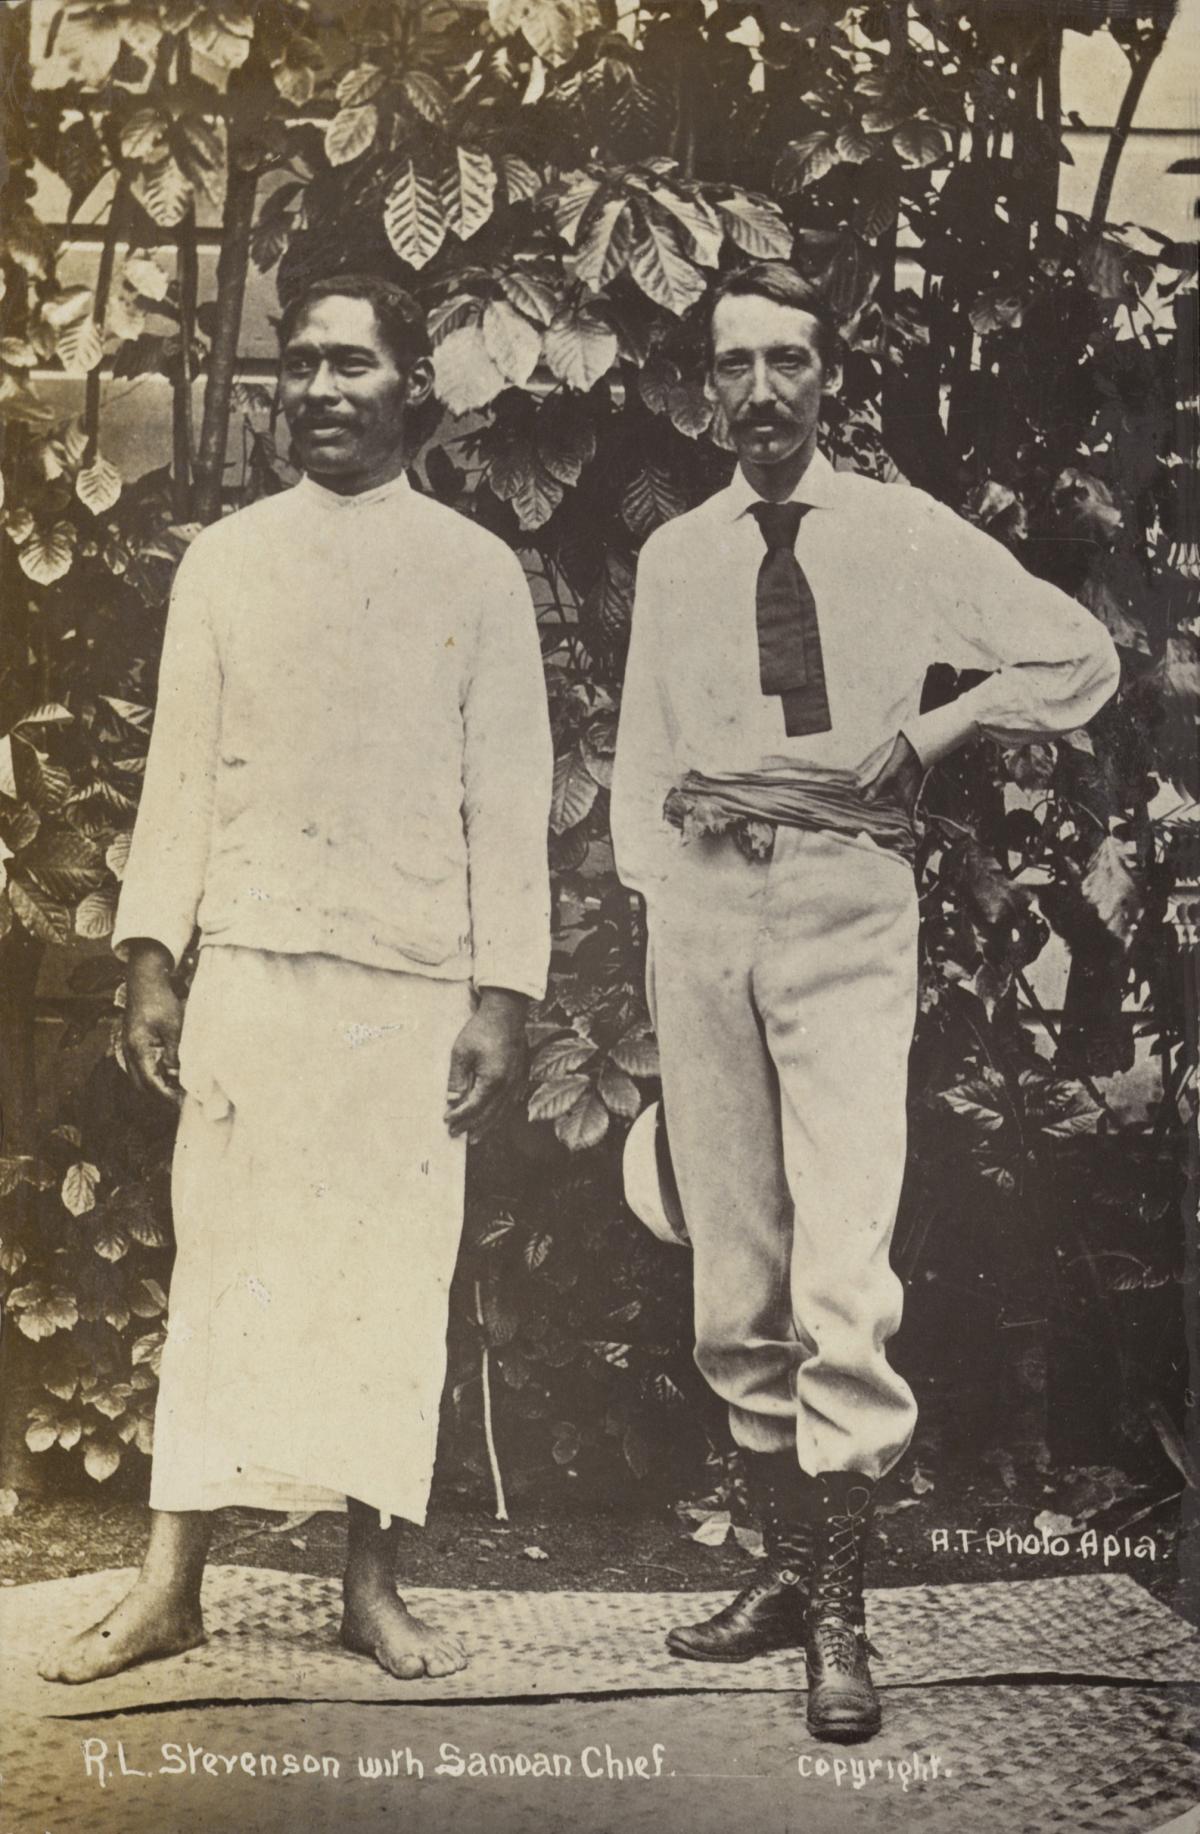 Black and white photo of Stevenson in a white shirt and hand on his hip, standing next to a Samoan chief, who is dressed in traditional white Samoan clothing